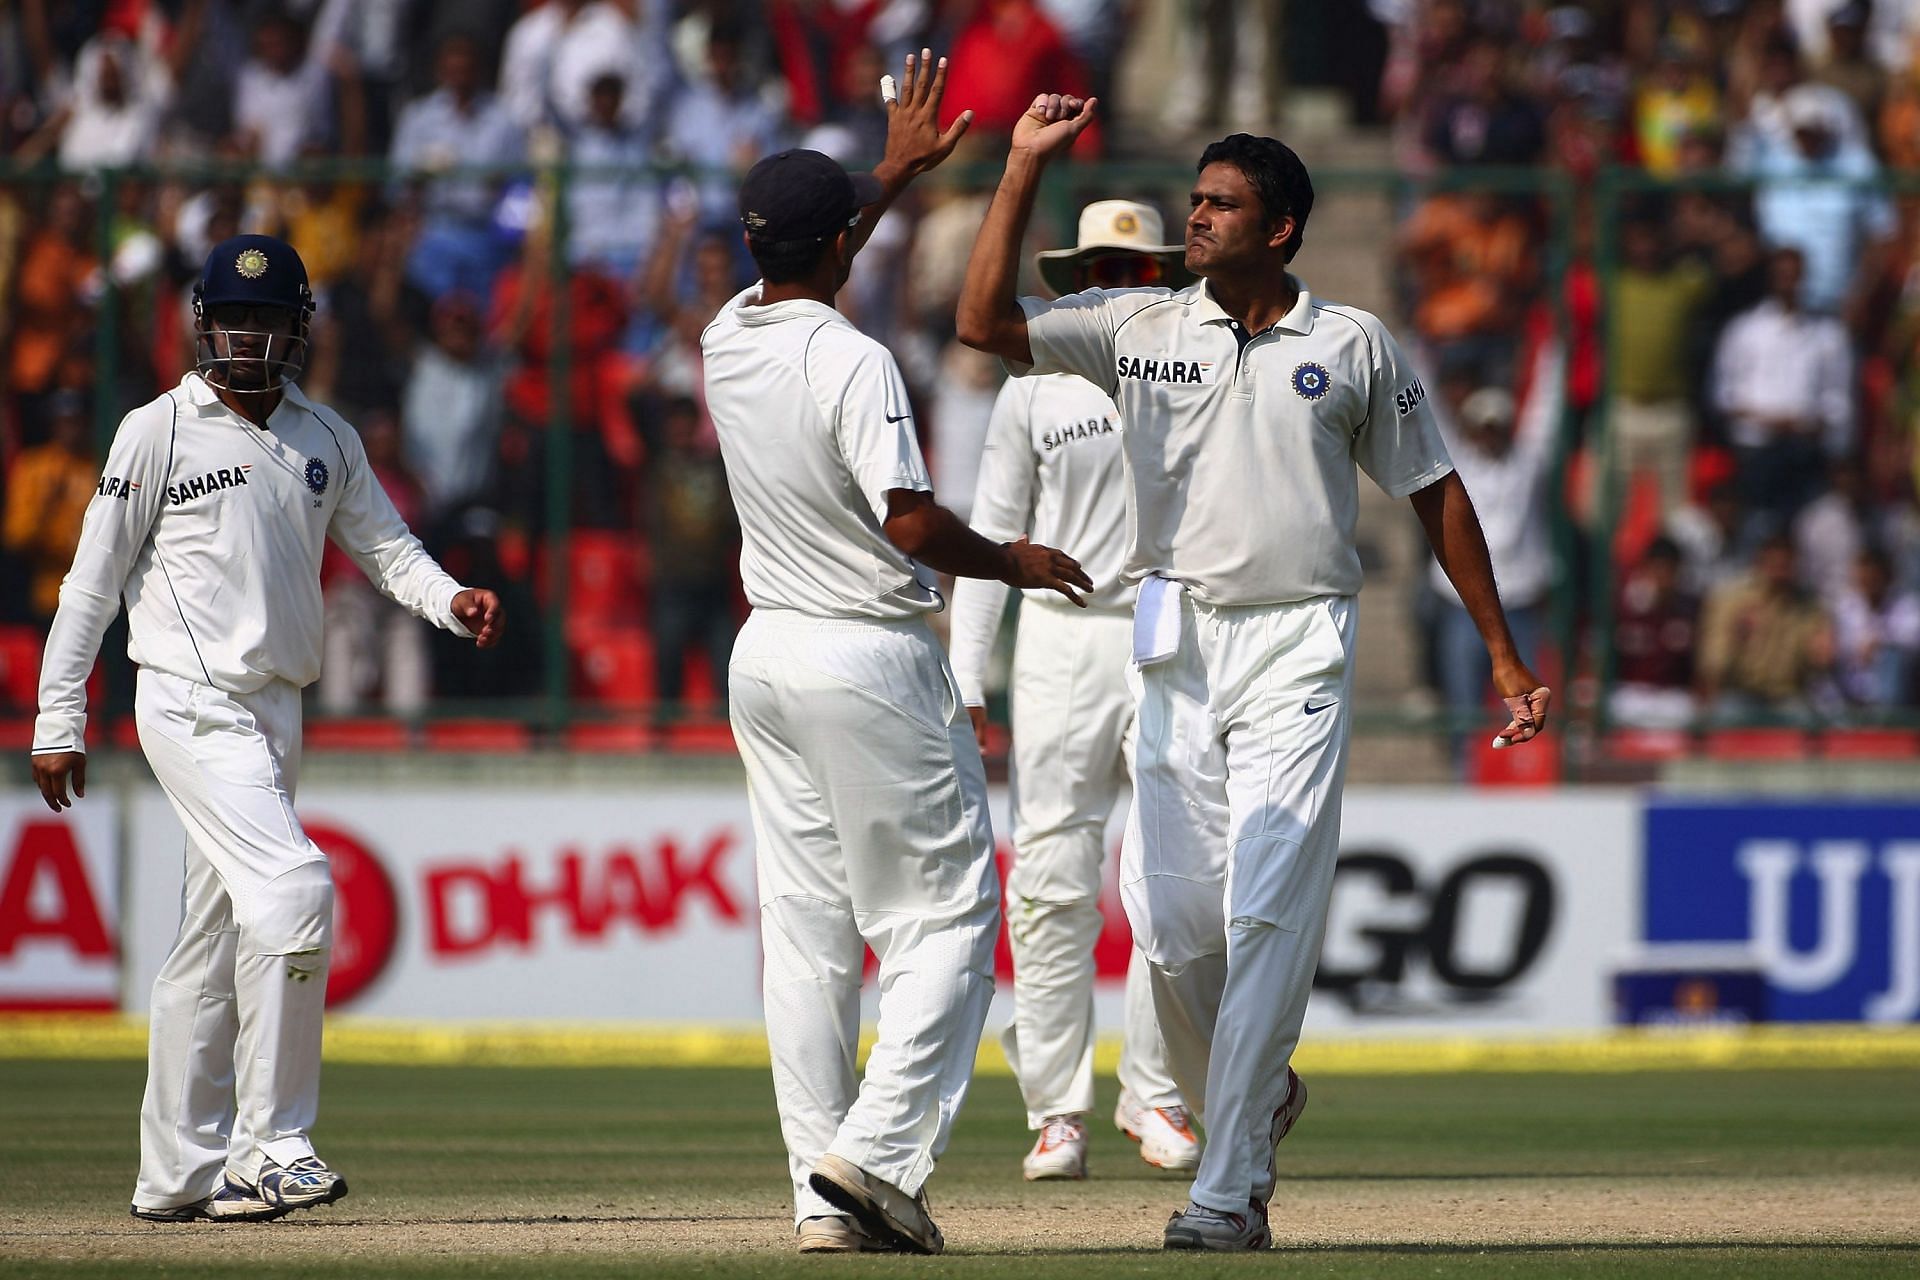 Anil Kumble was a proven match-winner for India